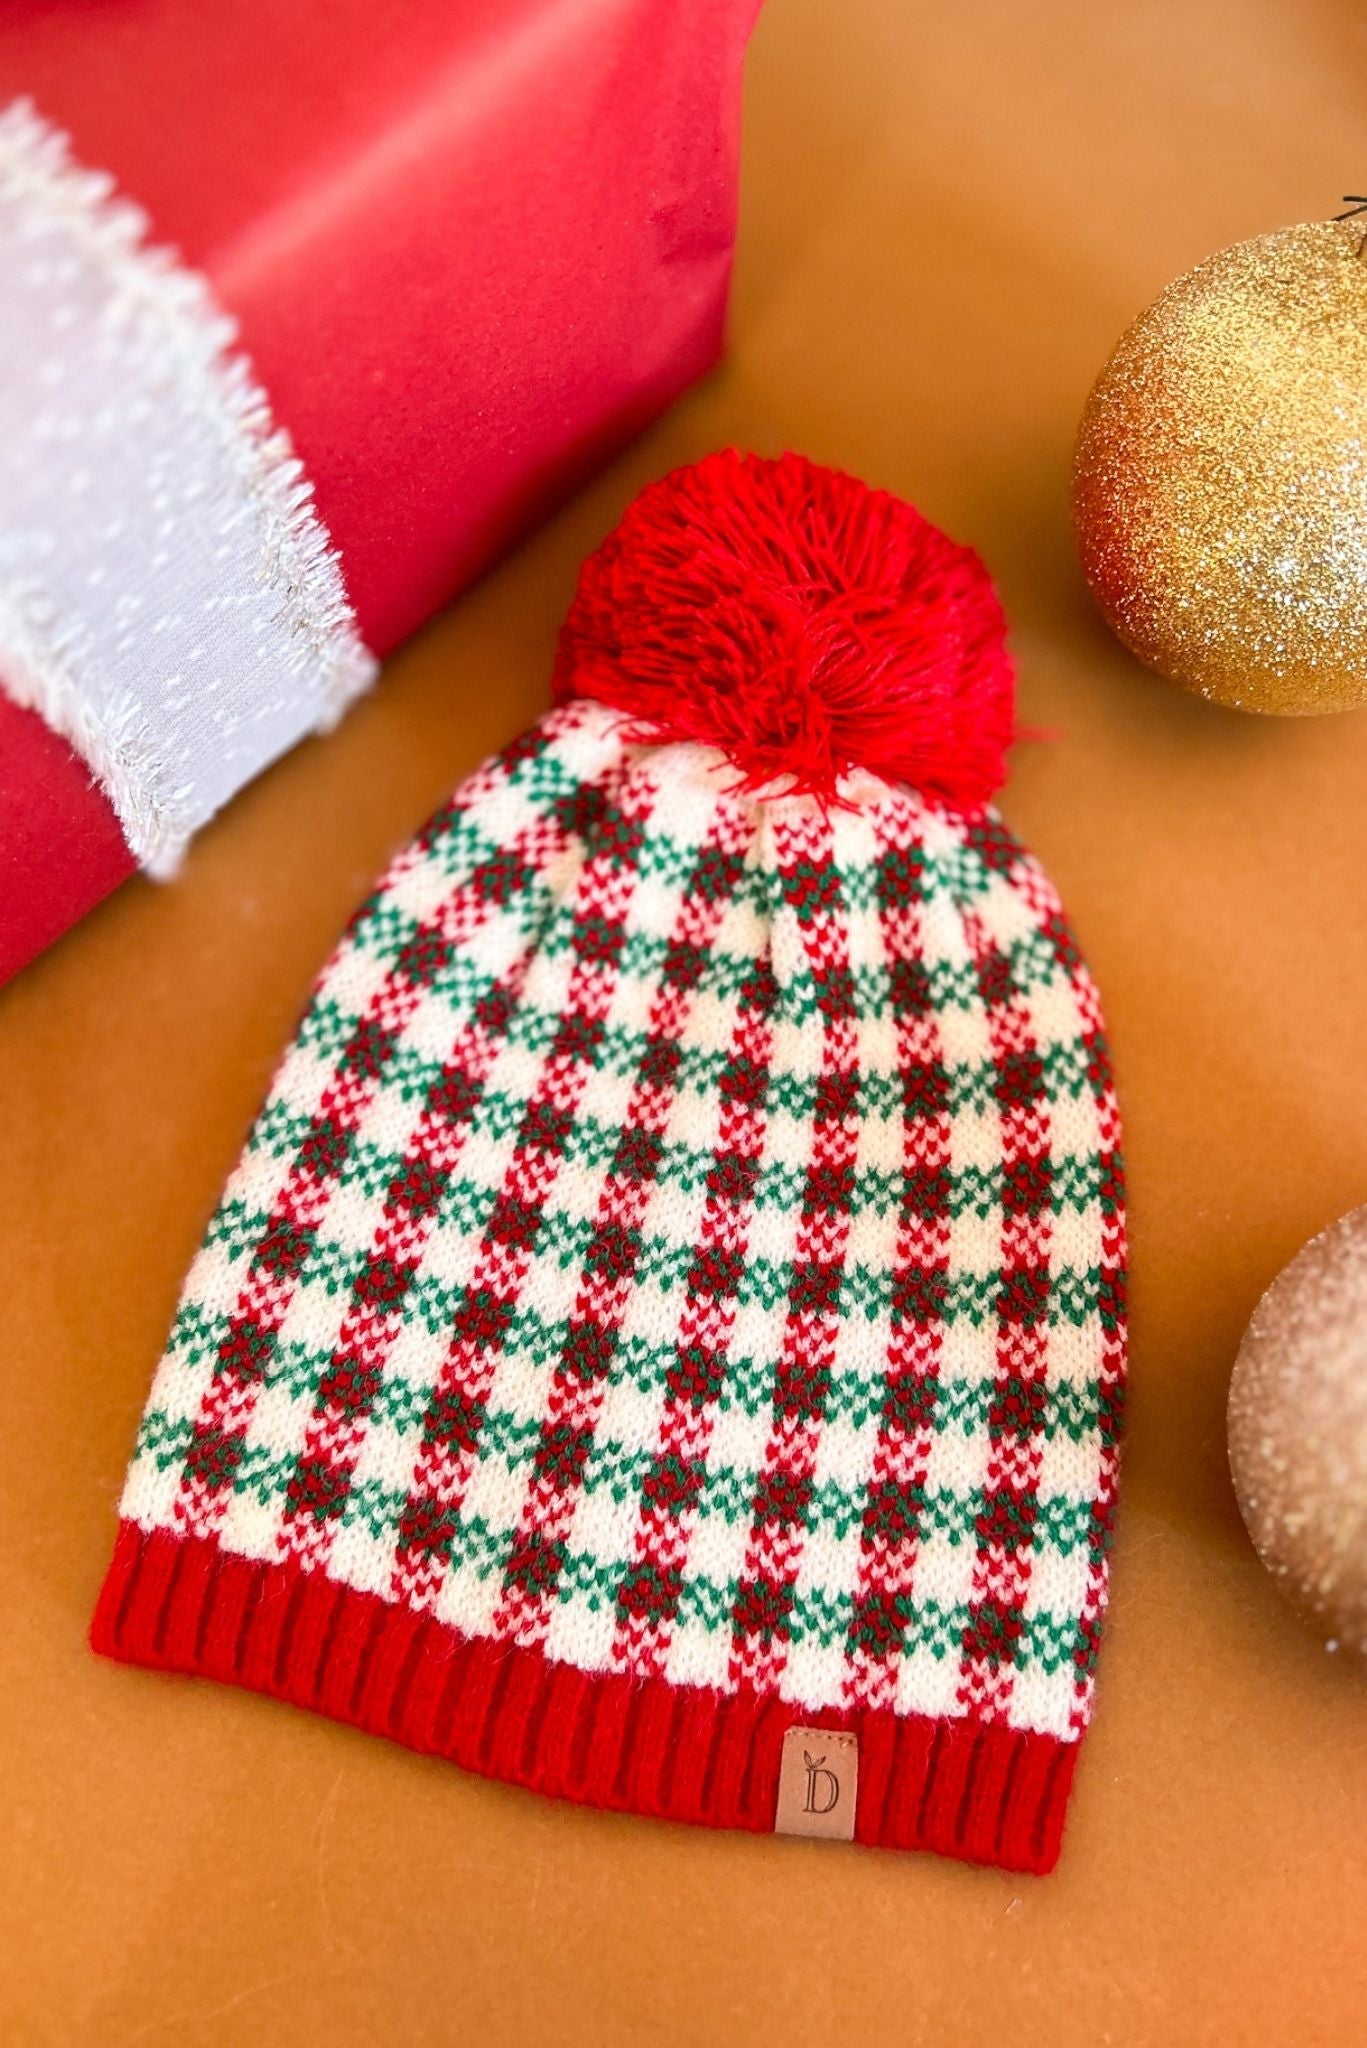  Red Check Patterned Pom Pom Beanie Hat, accessory, beanie, must have style, elevated style, mom style, shop style your senses by mallory fitzsimmons